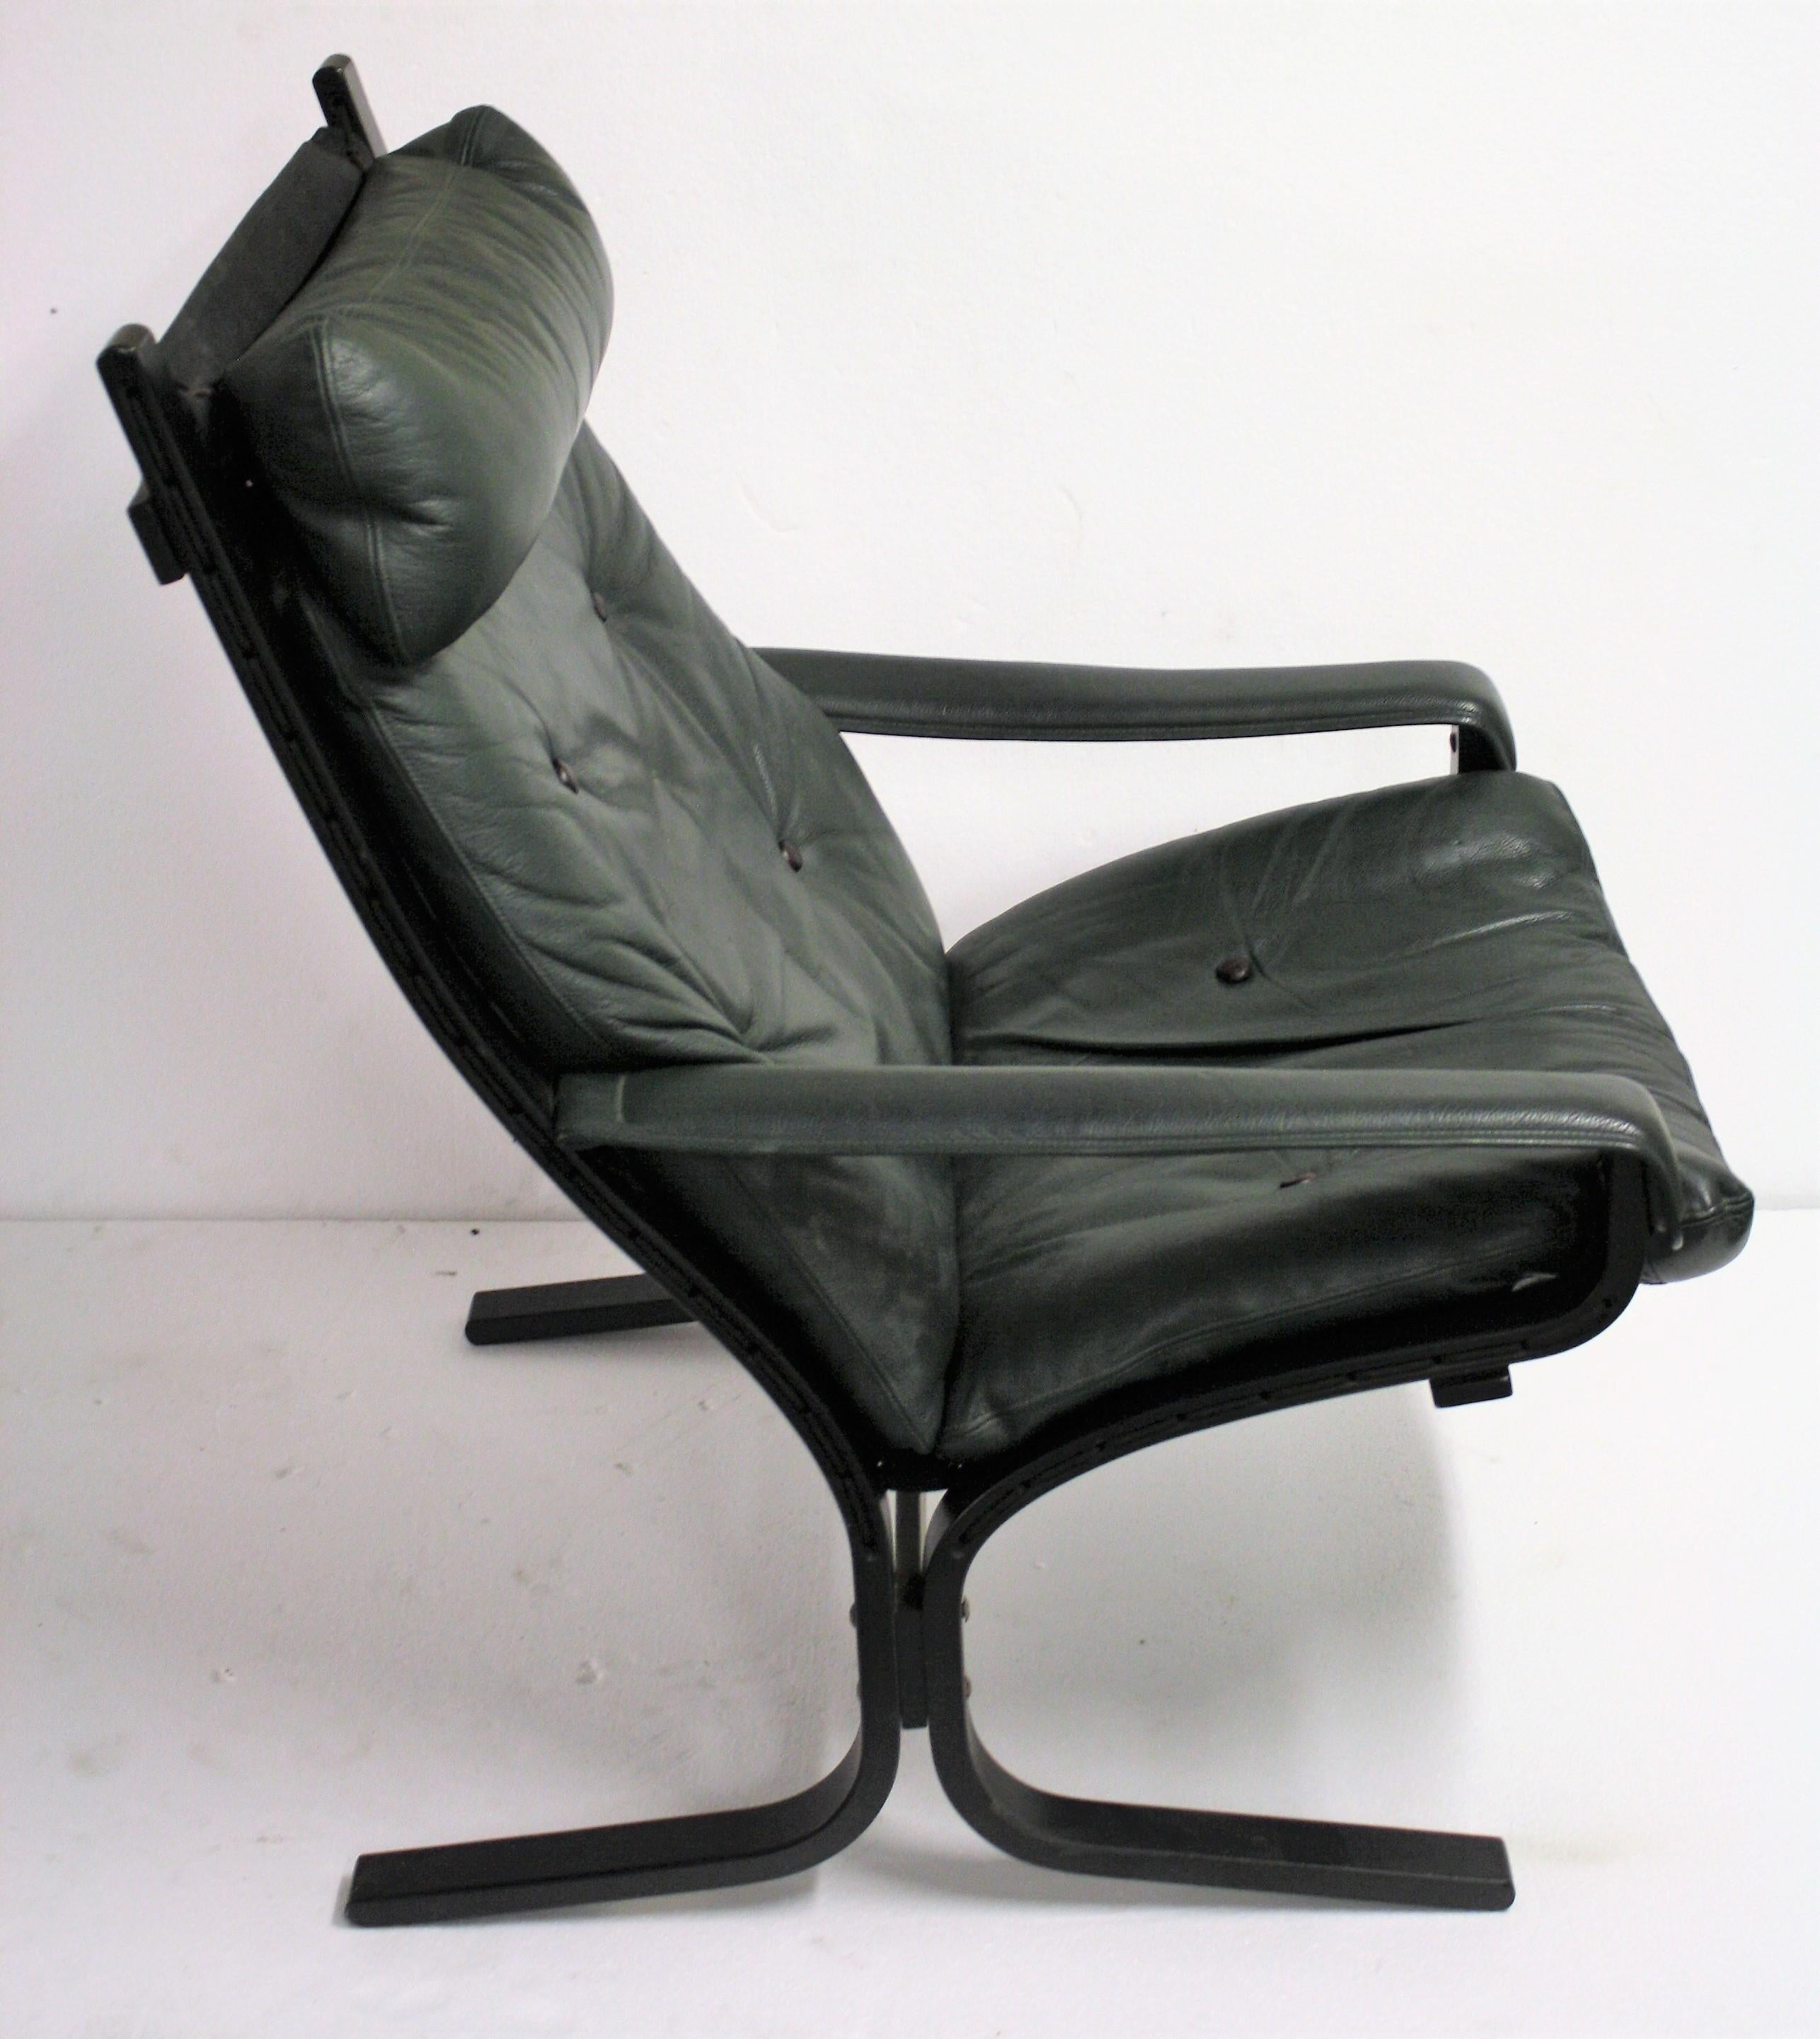 Vintage leather siesta chair designed by Ingmar Relling for Westnofa.

This very comfortable chair consists or dark green leather cushions on a black bentwood frame.

The chair is marked with WestNofa underneath.

Norway, 1970s.

Perfect